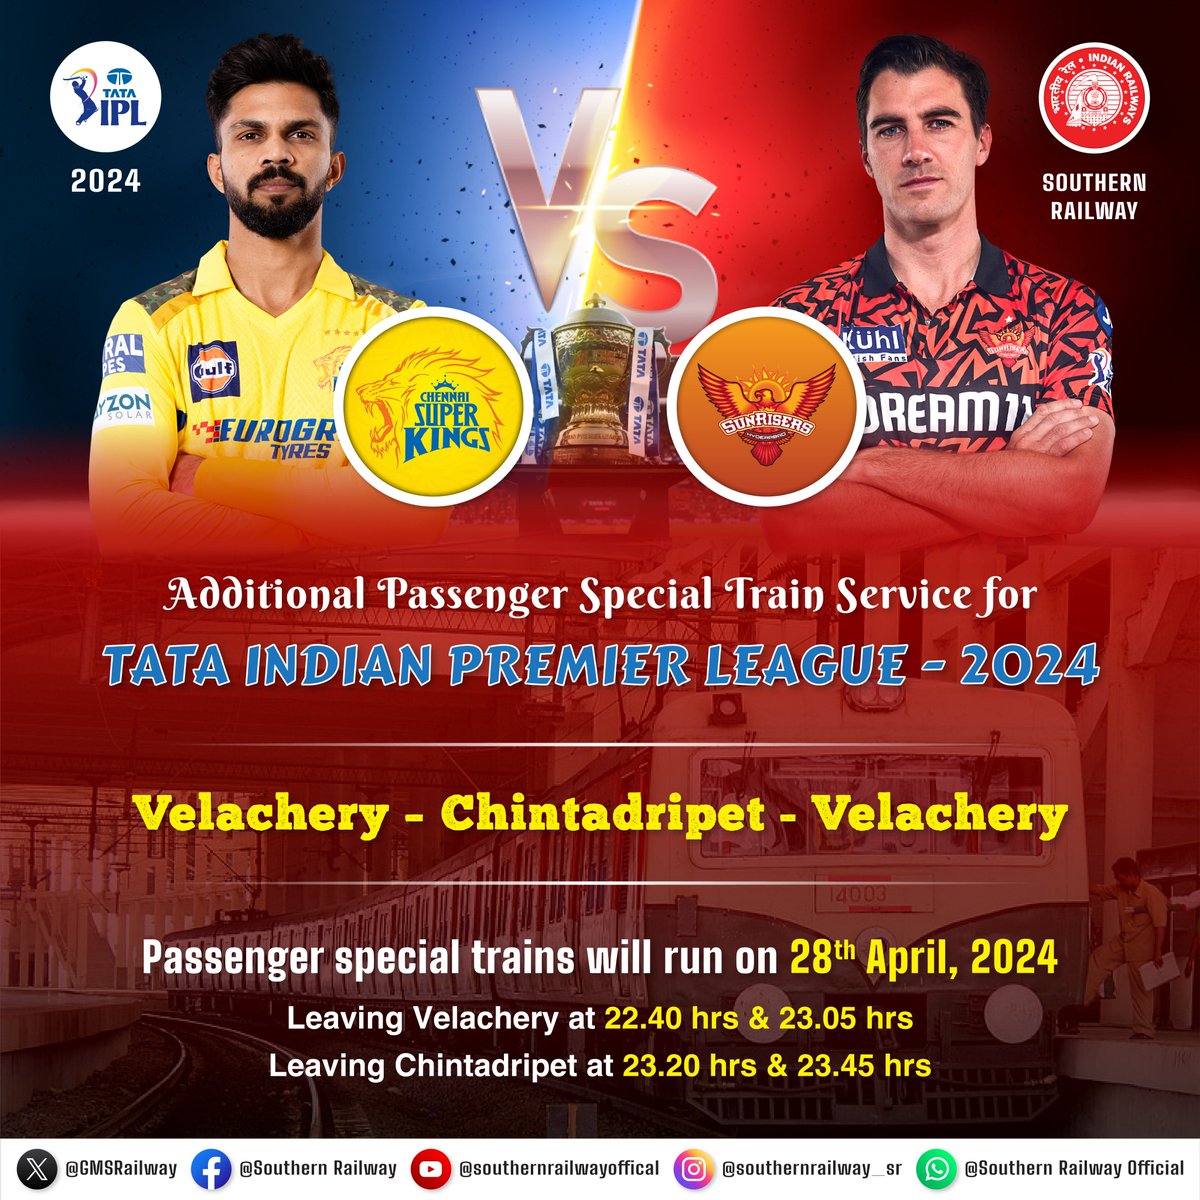 #SpecialTrain service for #TATAIPL fans!  

Now you can easily commute between #Velachery and #Chintadripet after the match on April 28th. (Departs Velachery: 10.40 PM & 11.05 PM | Departs Chintadripet: 11.20 PM & 11.45 PM)         

#IPL2024 #Cricket #T20 #IPLUpdate